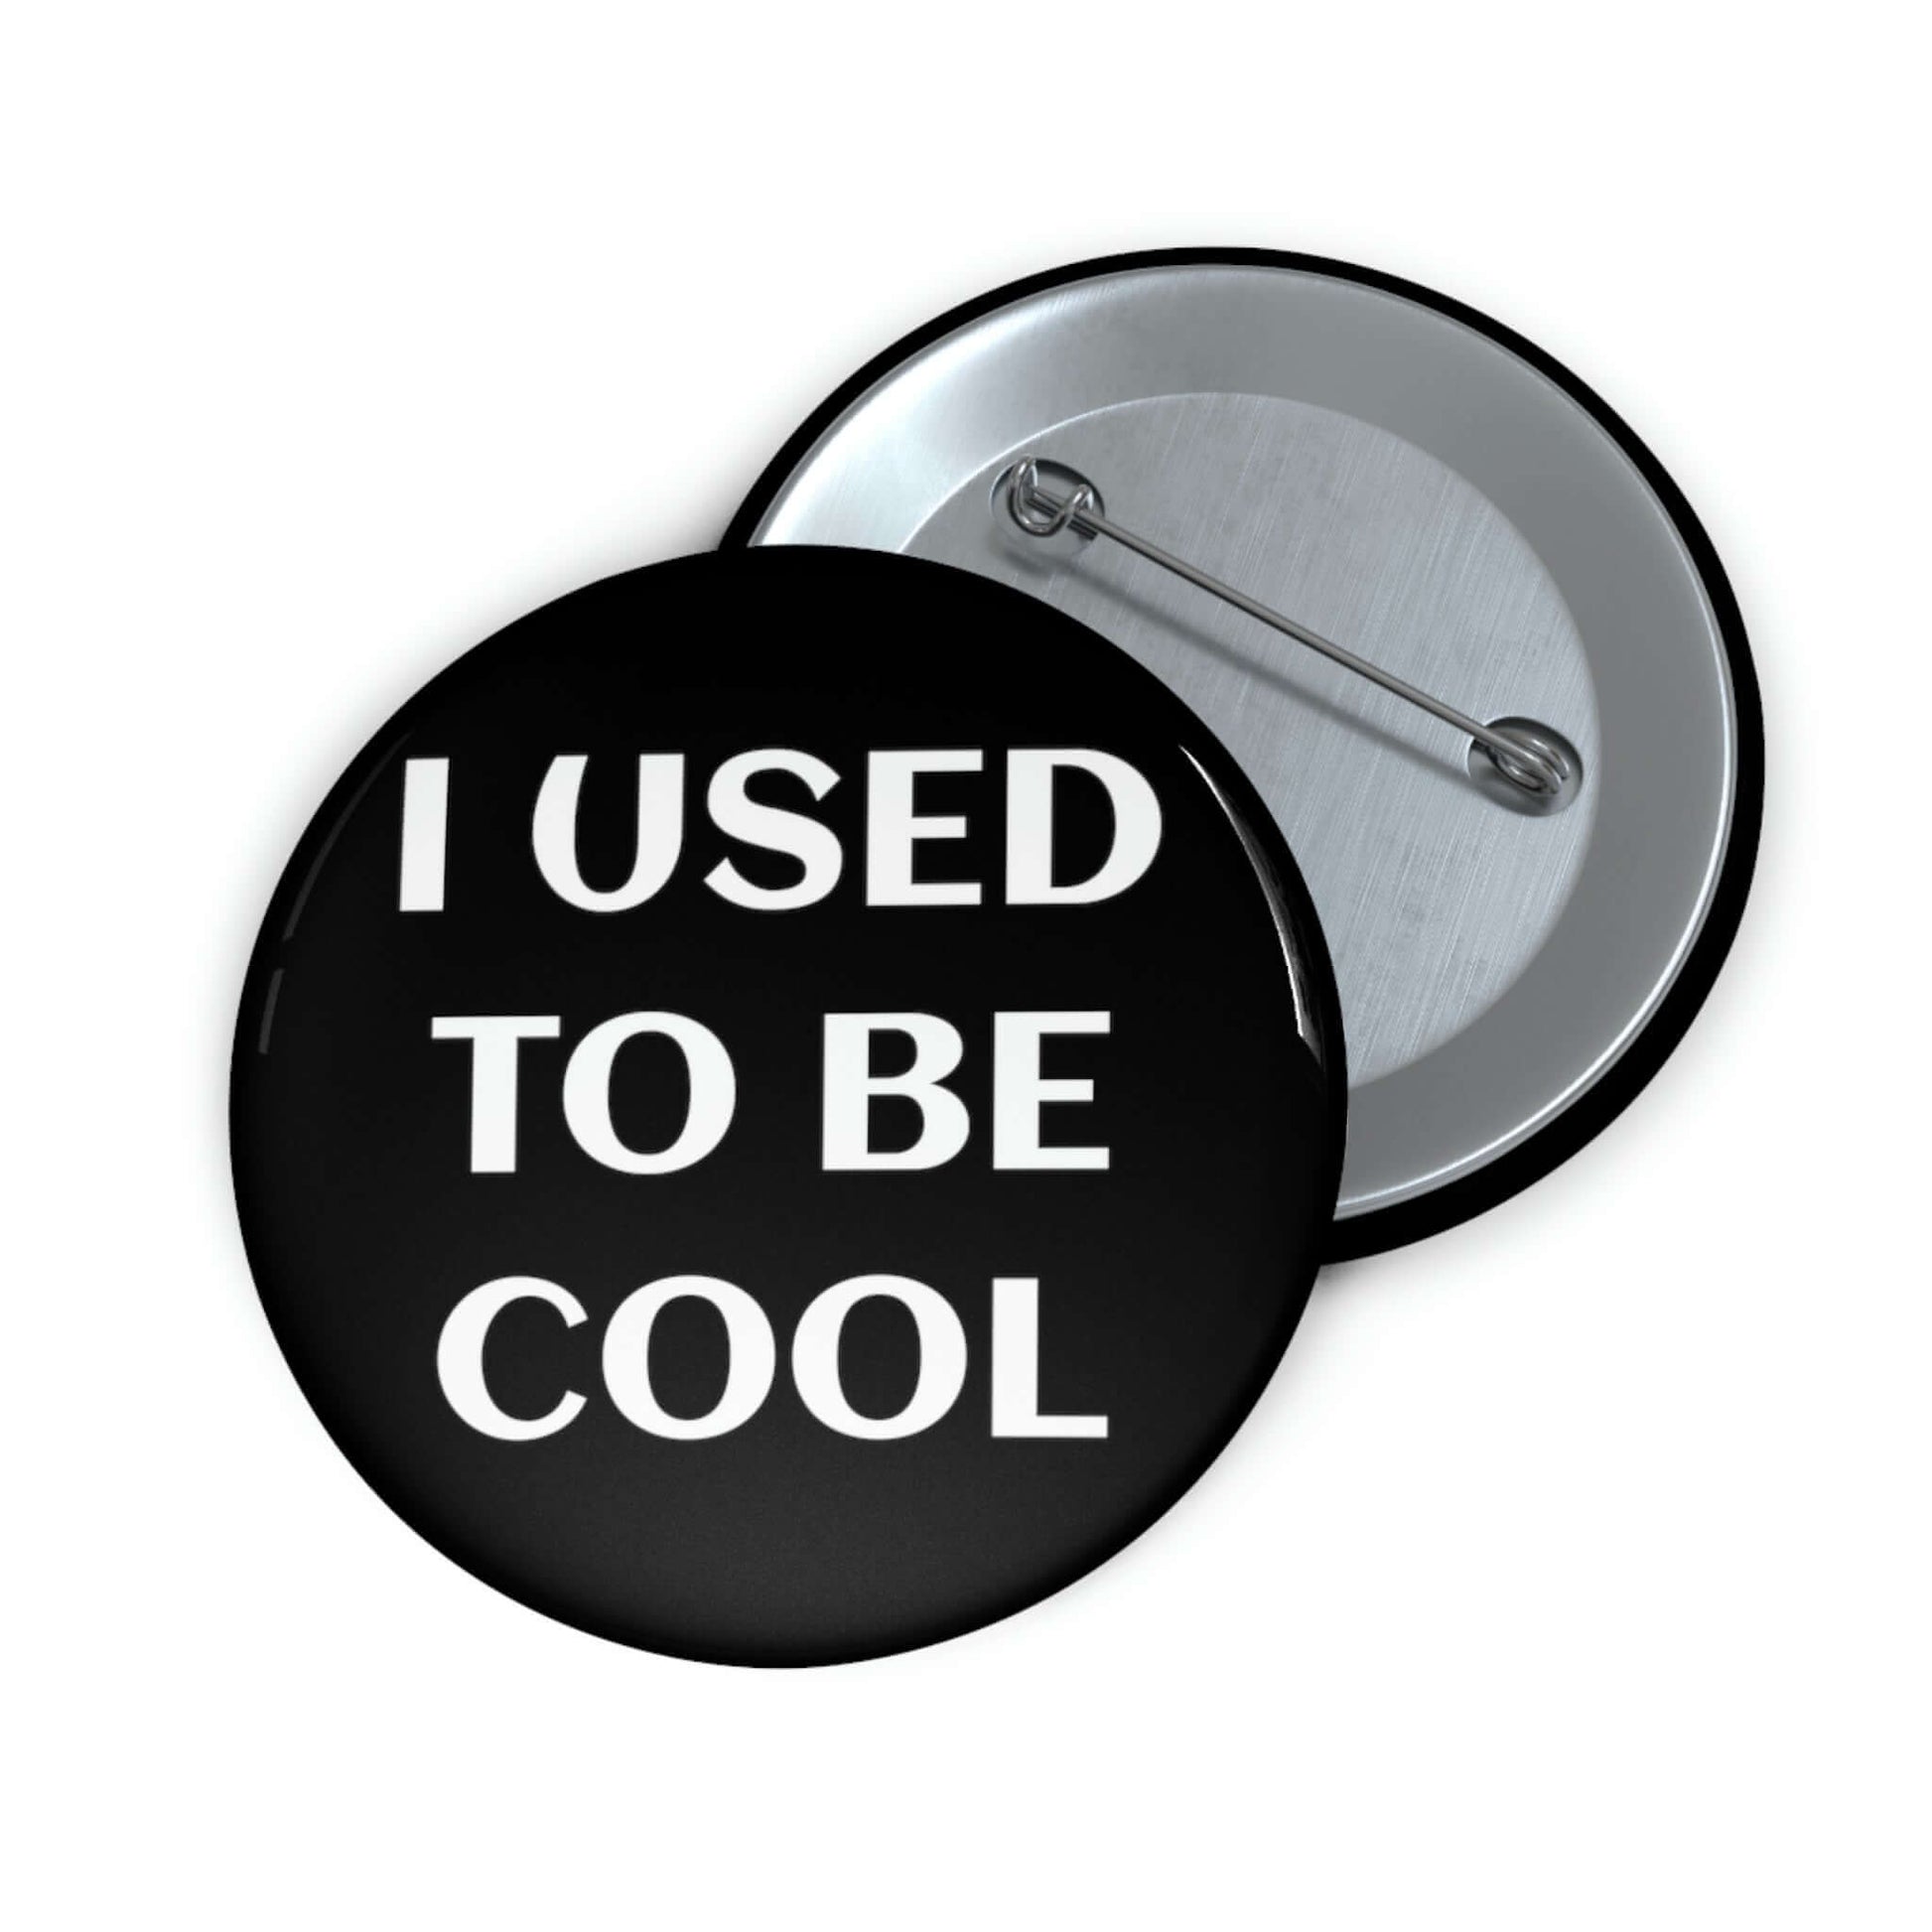 I used to be cool pin-back button.